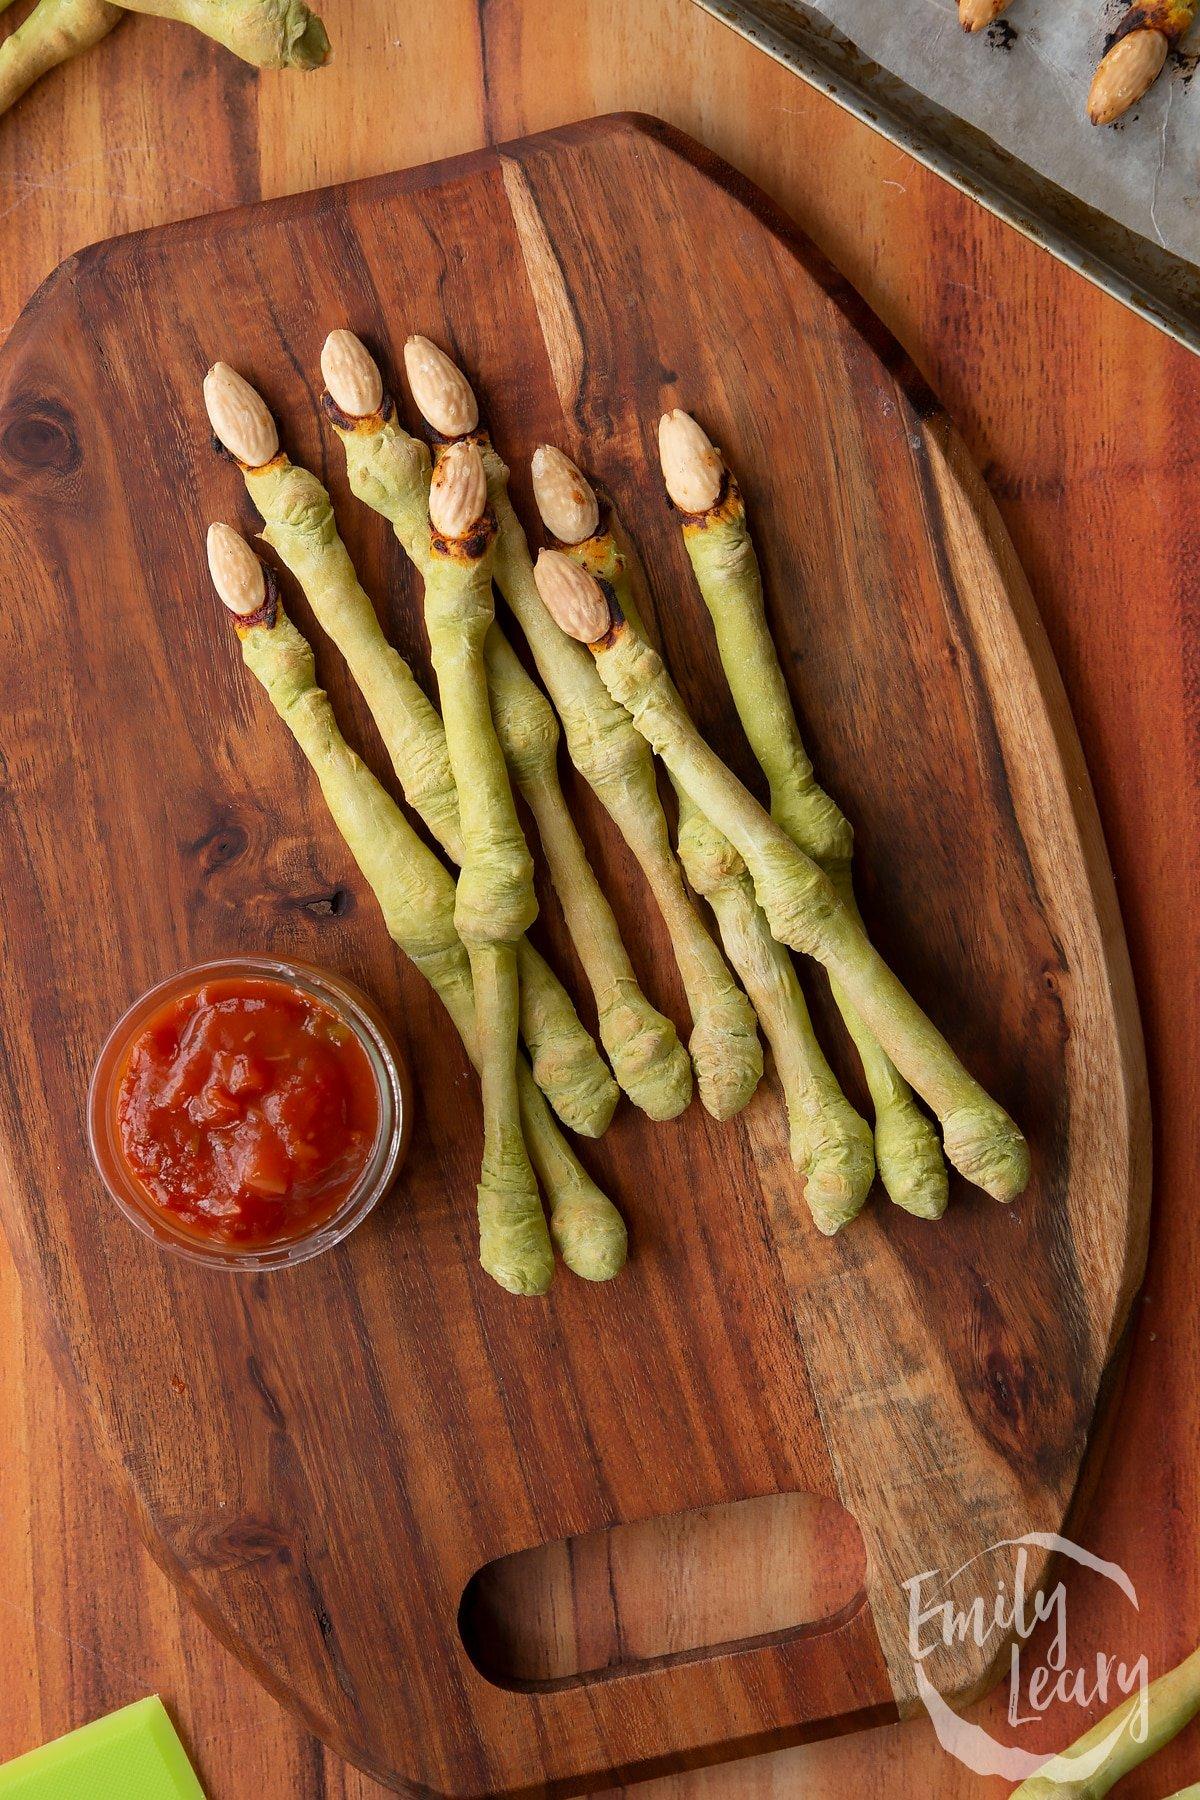 Witch finger breadsticks that are naturally green and almond fingern ails